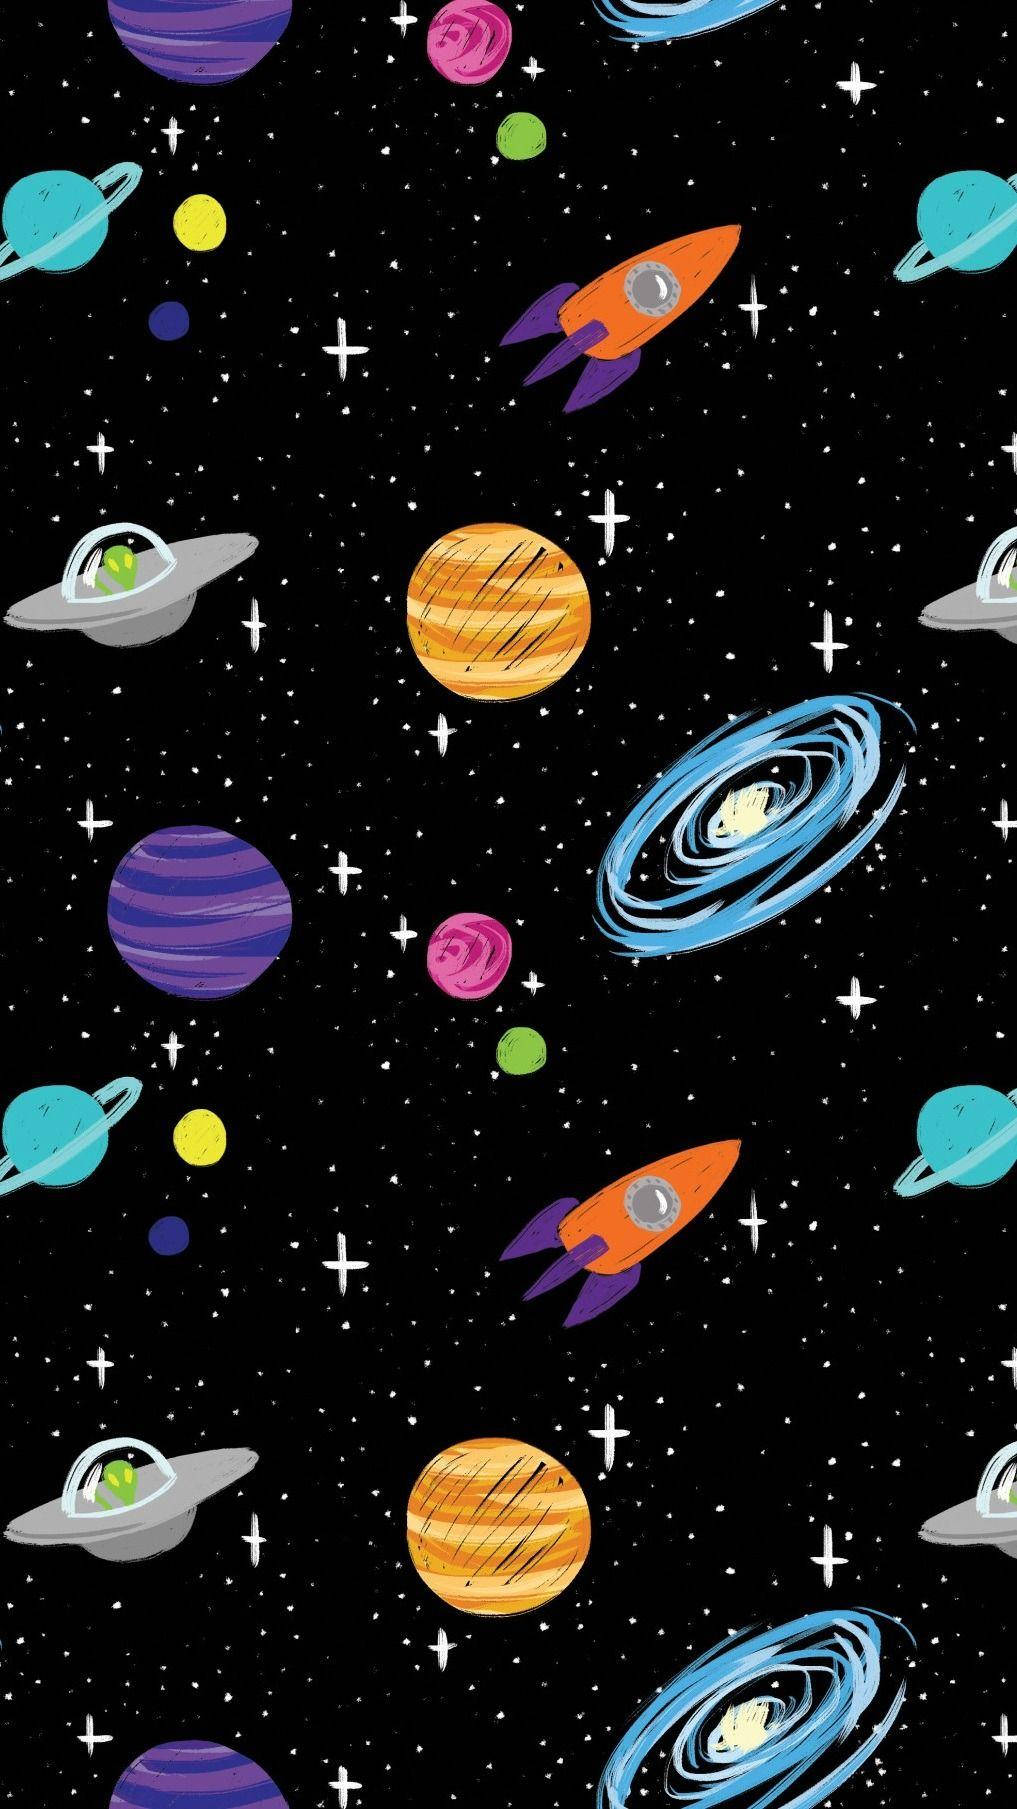 Space Aesthetic Spaceship And Planets Wallpaper